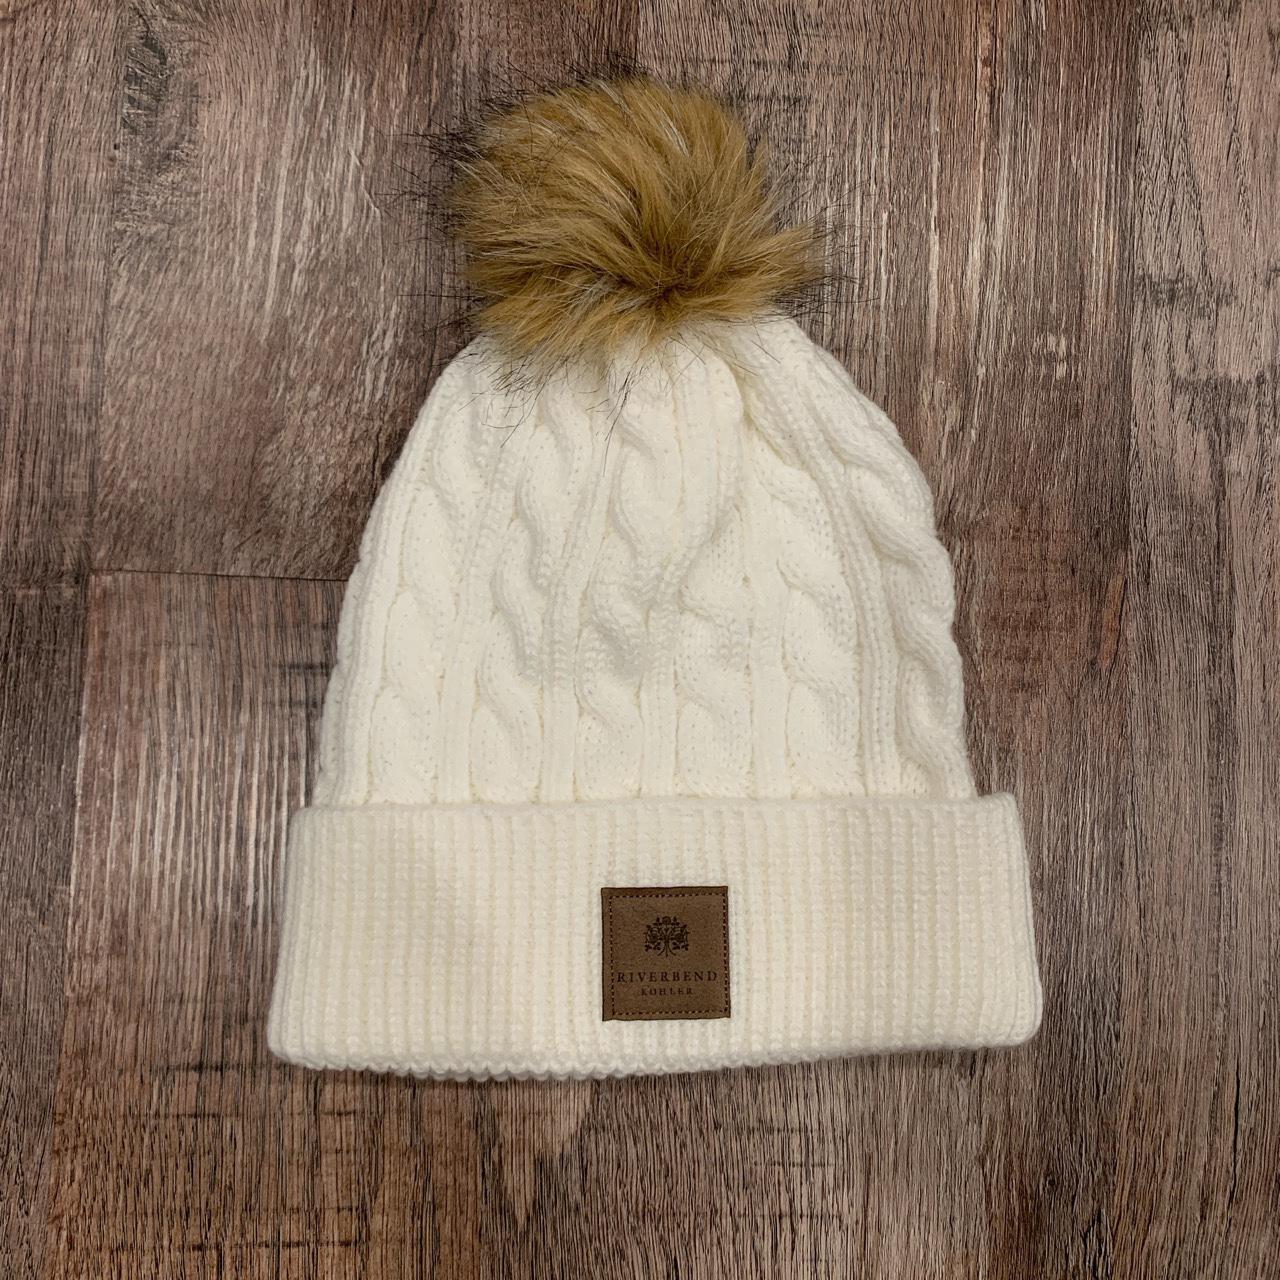 Product Image 1 - ❄️ Women’s Winter Hat Knitted